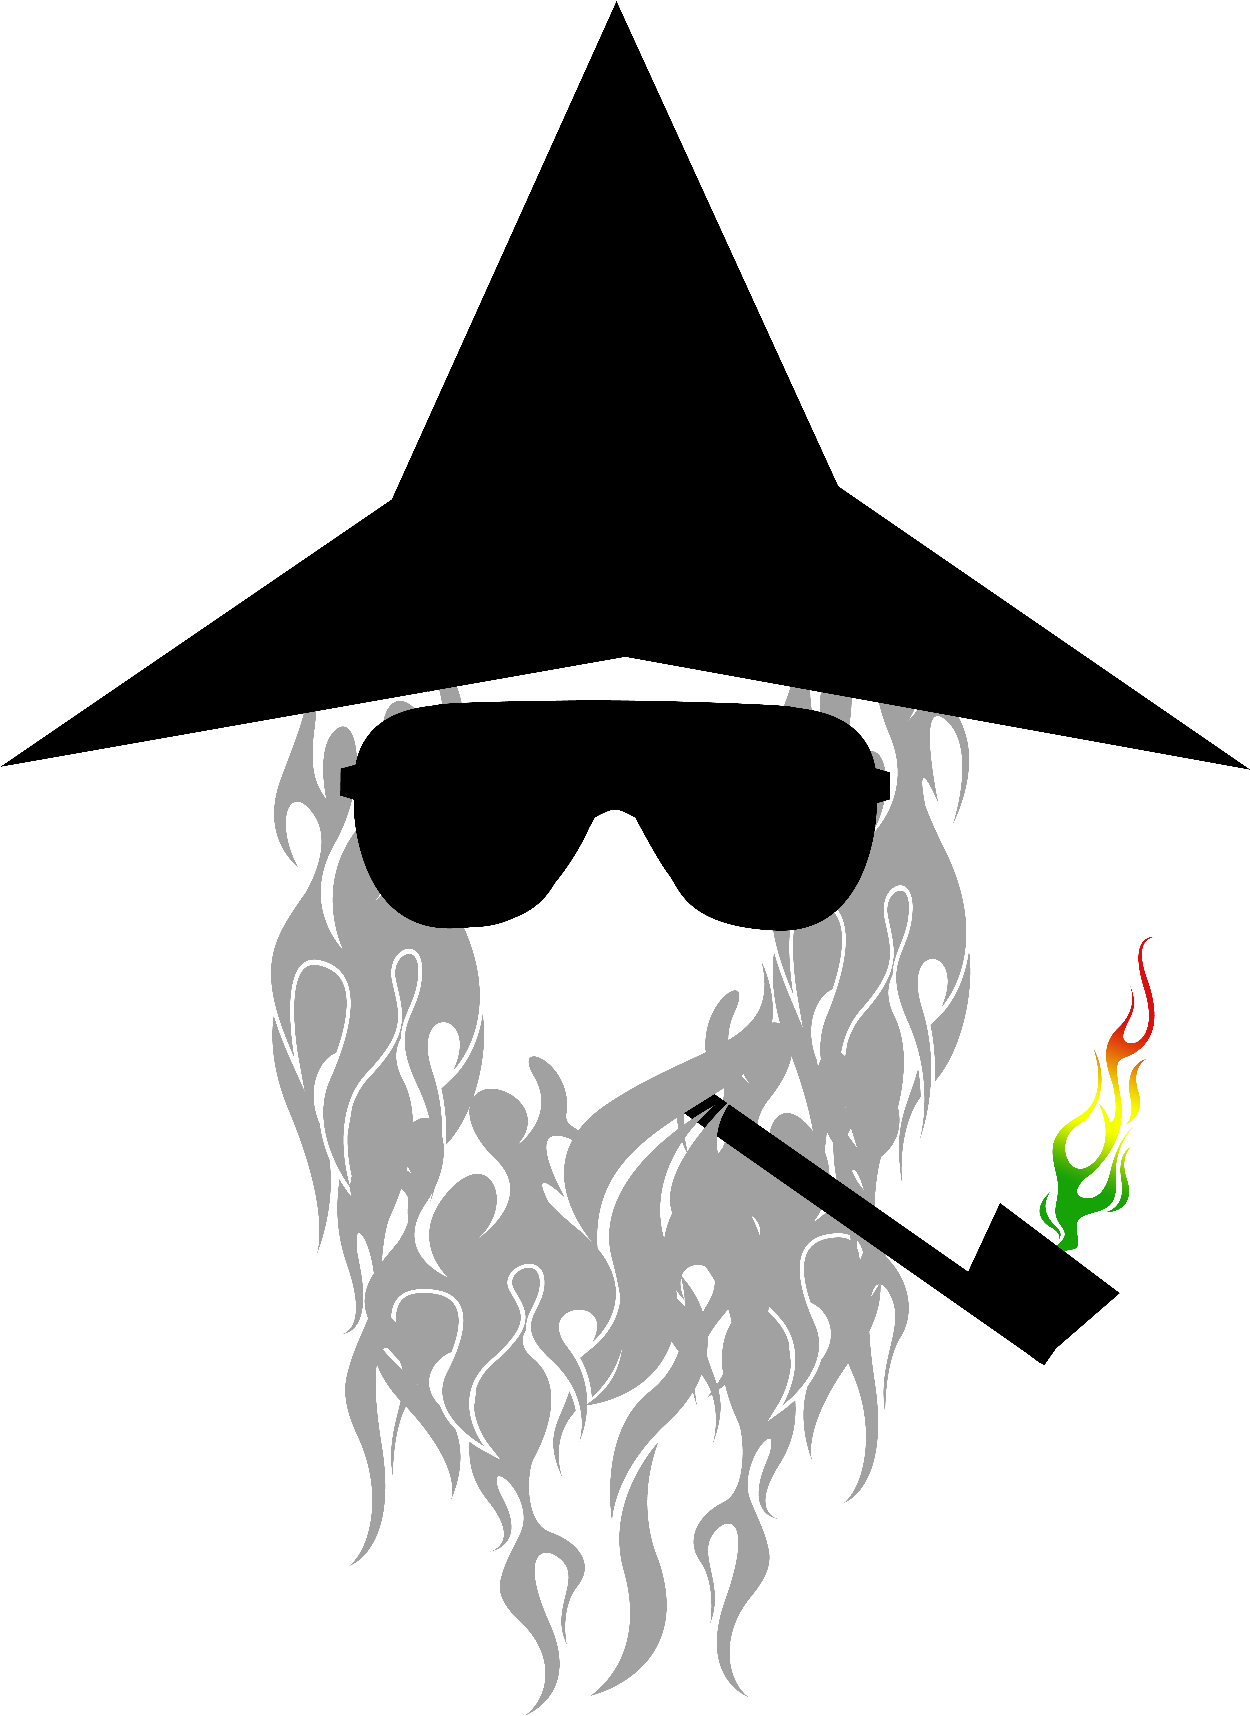 Cool Gandalf Stylized Graphic PNG image